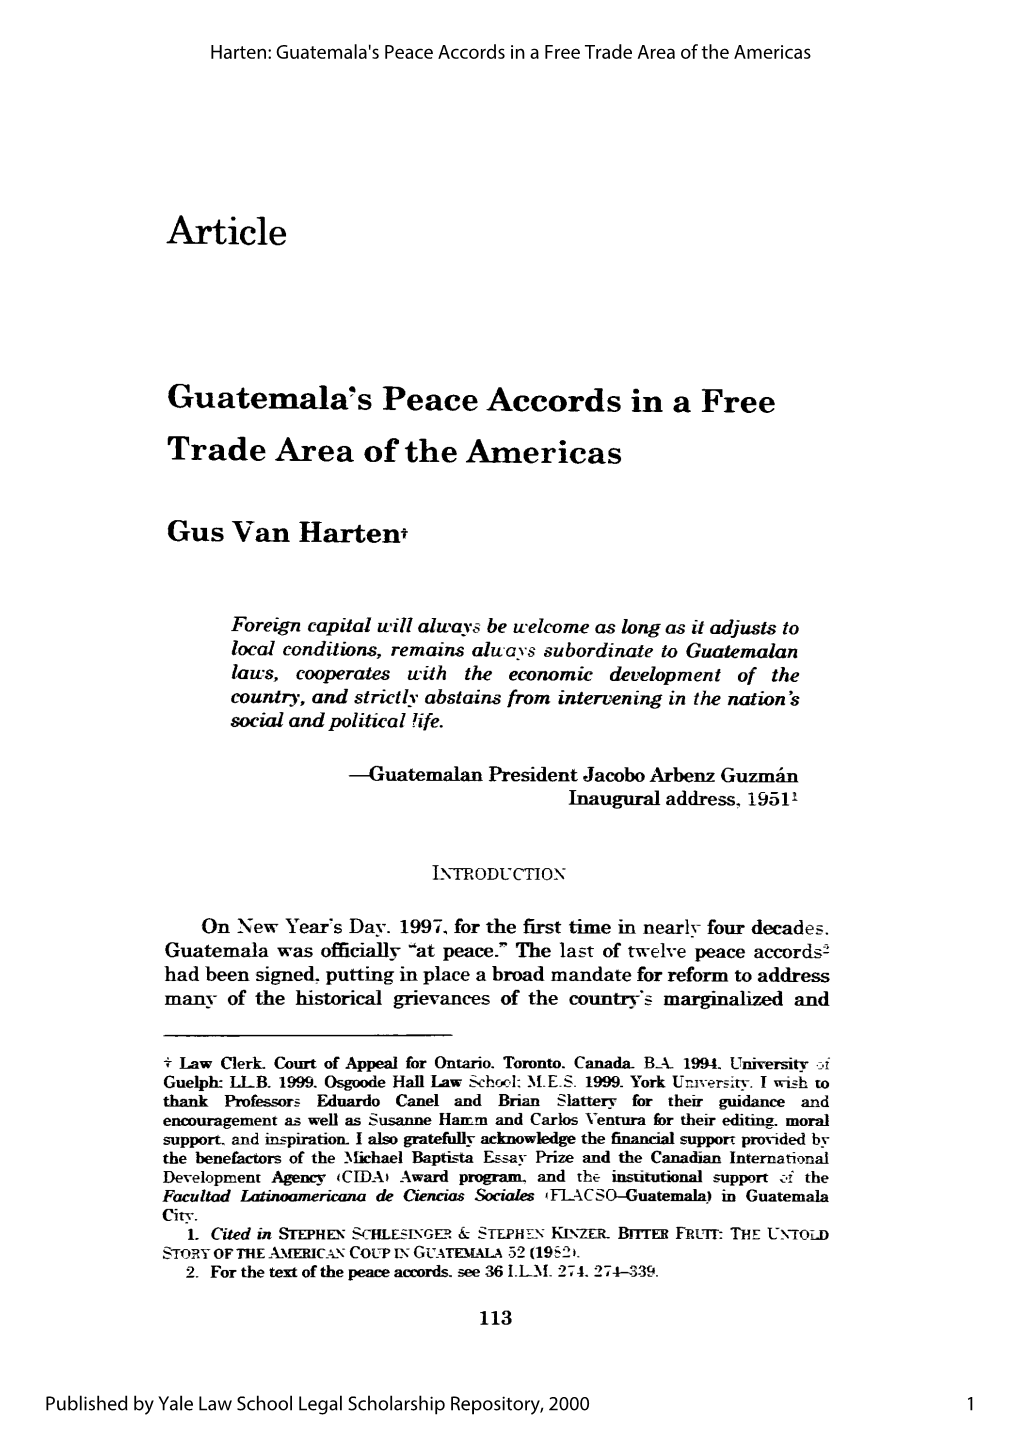 Guatemala's Peace Accords in a Free Trade Area of the Americas